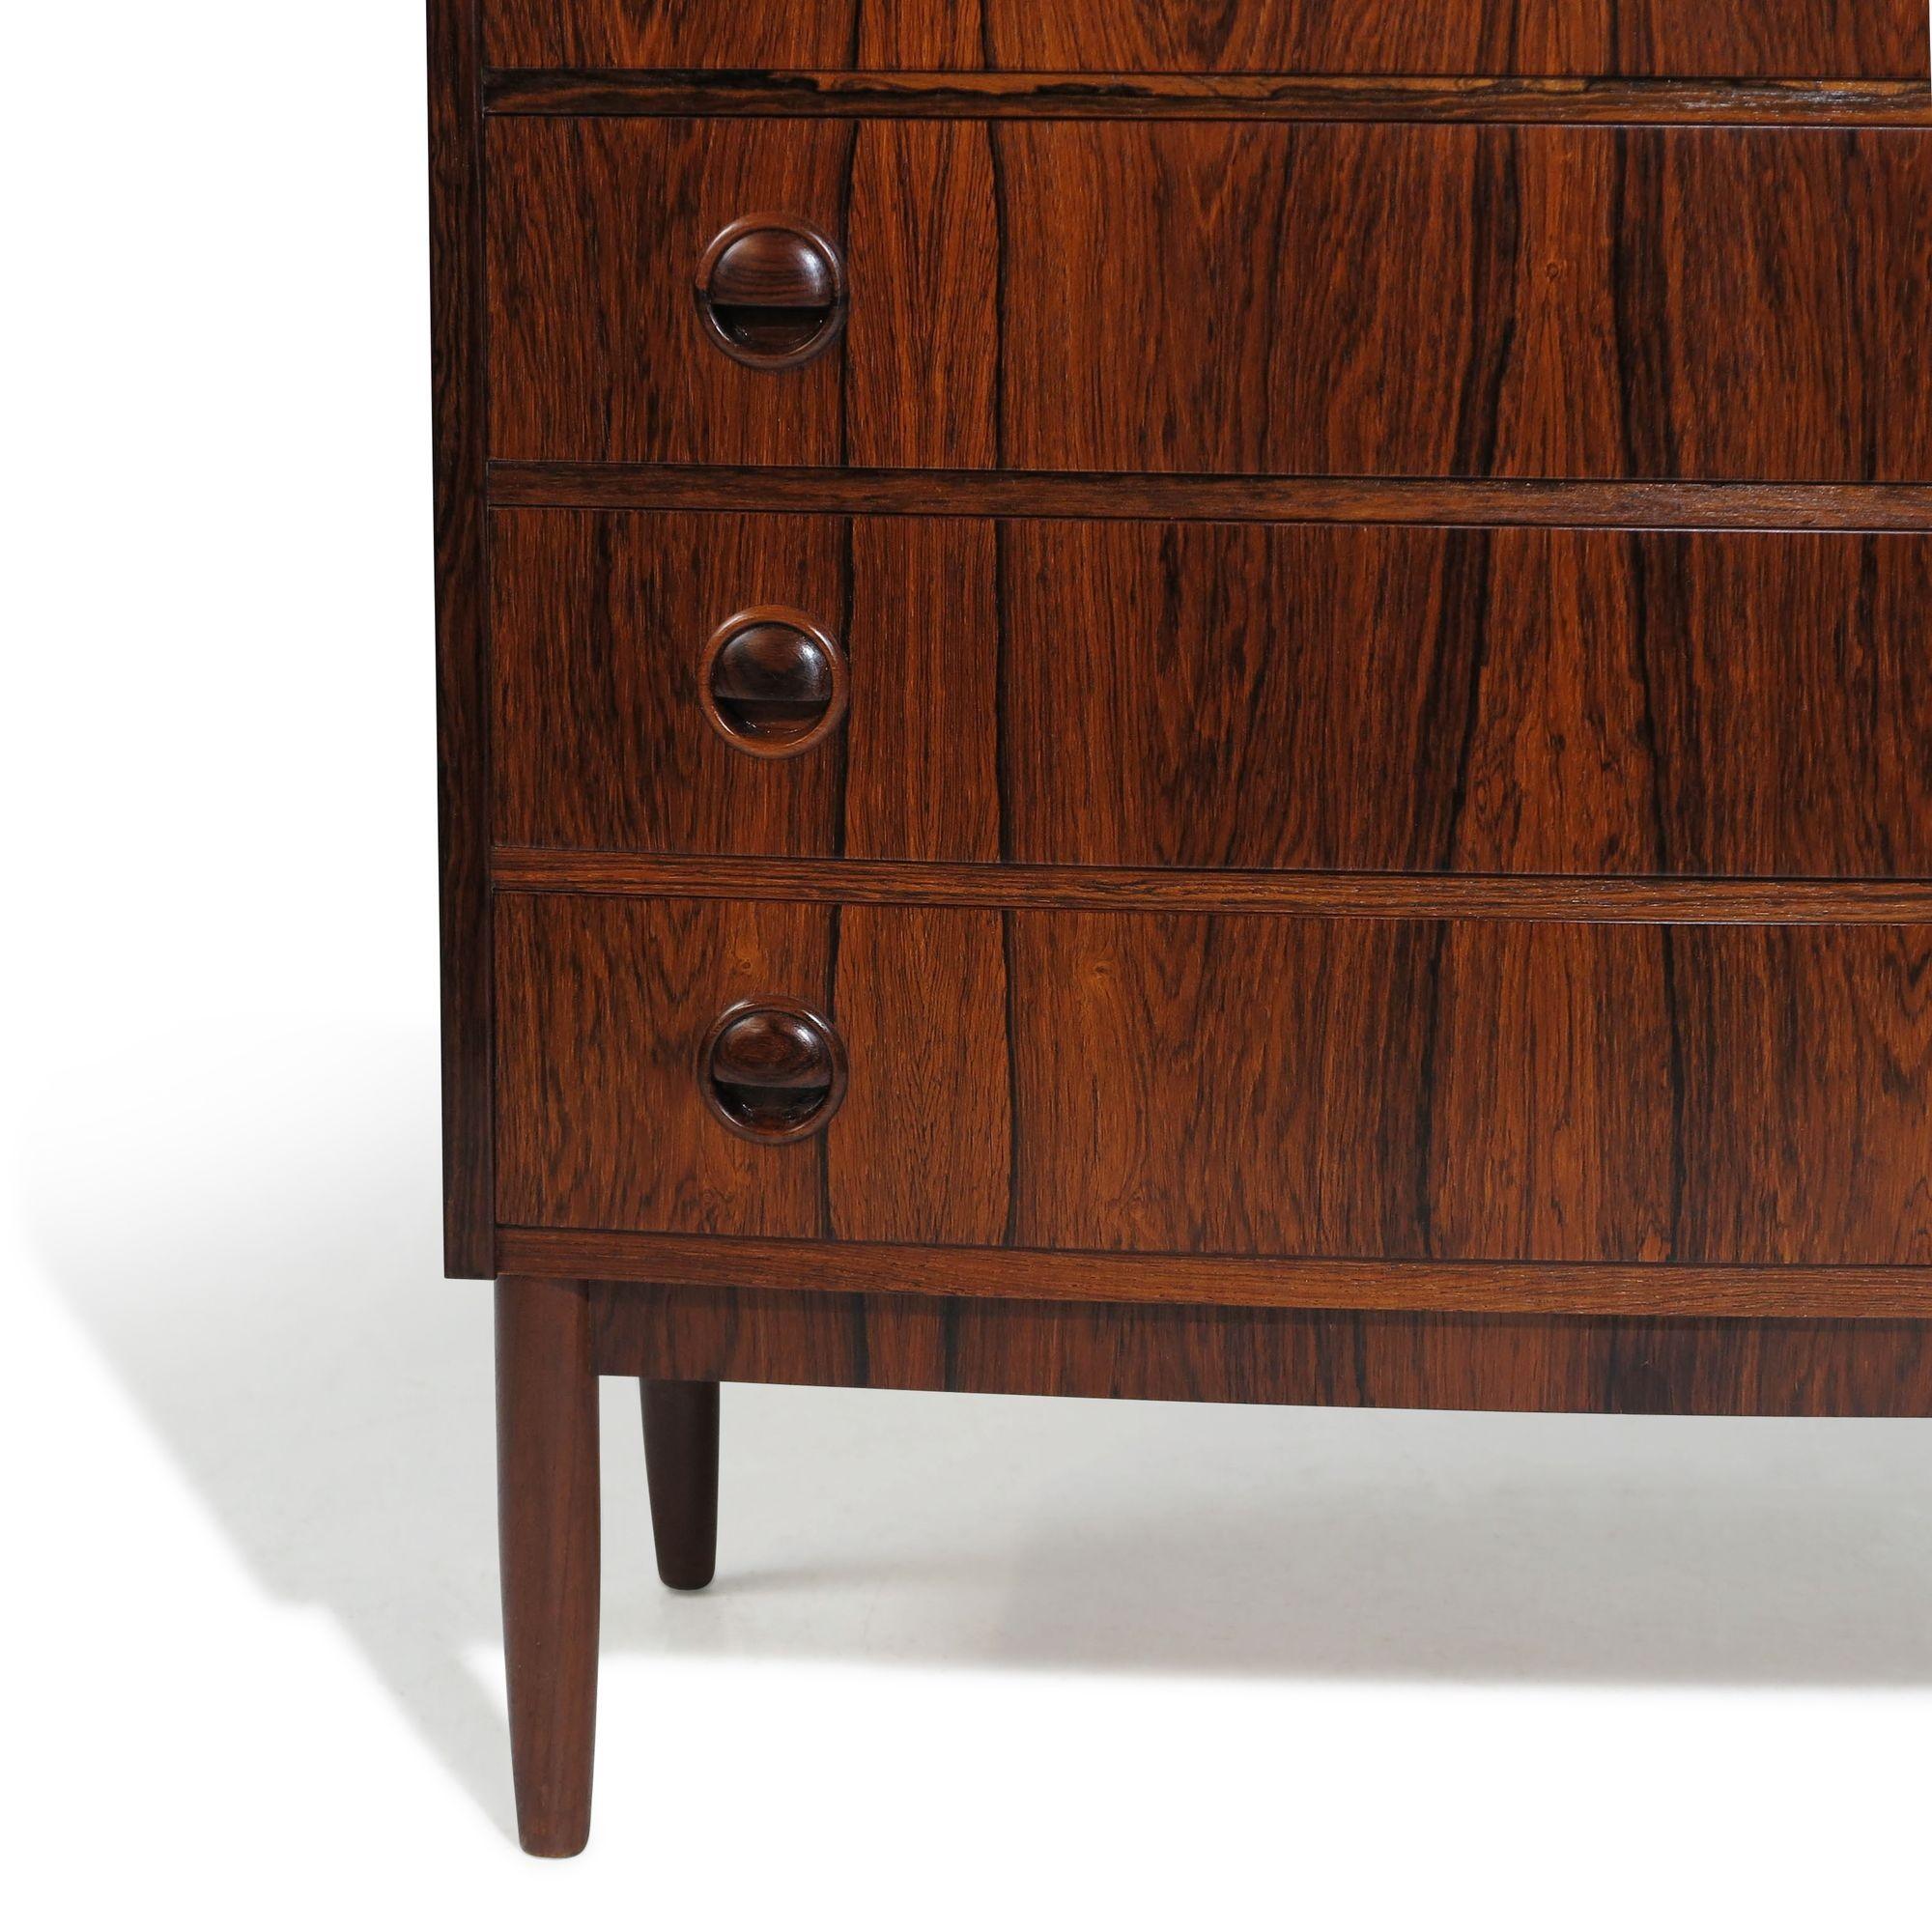 Danish tall dresser, finely handcrafted from Brazilian rosewood, features mitered corners and beautifully grained rosewood with pattern-matched drawer fronts, each adorned with circular carved pulls. The top drawer is equipped with a locking